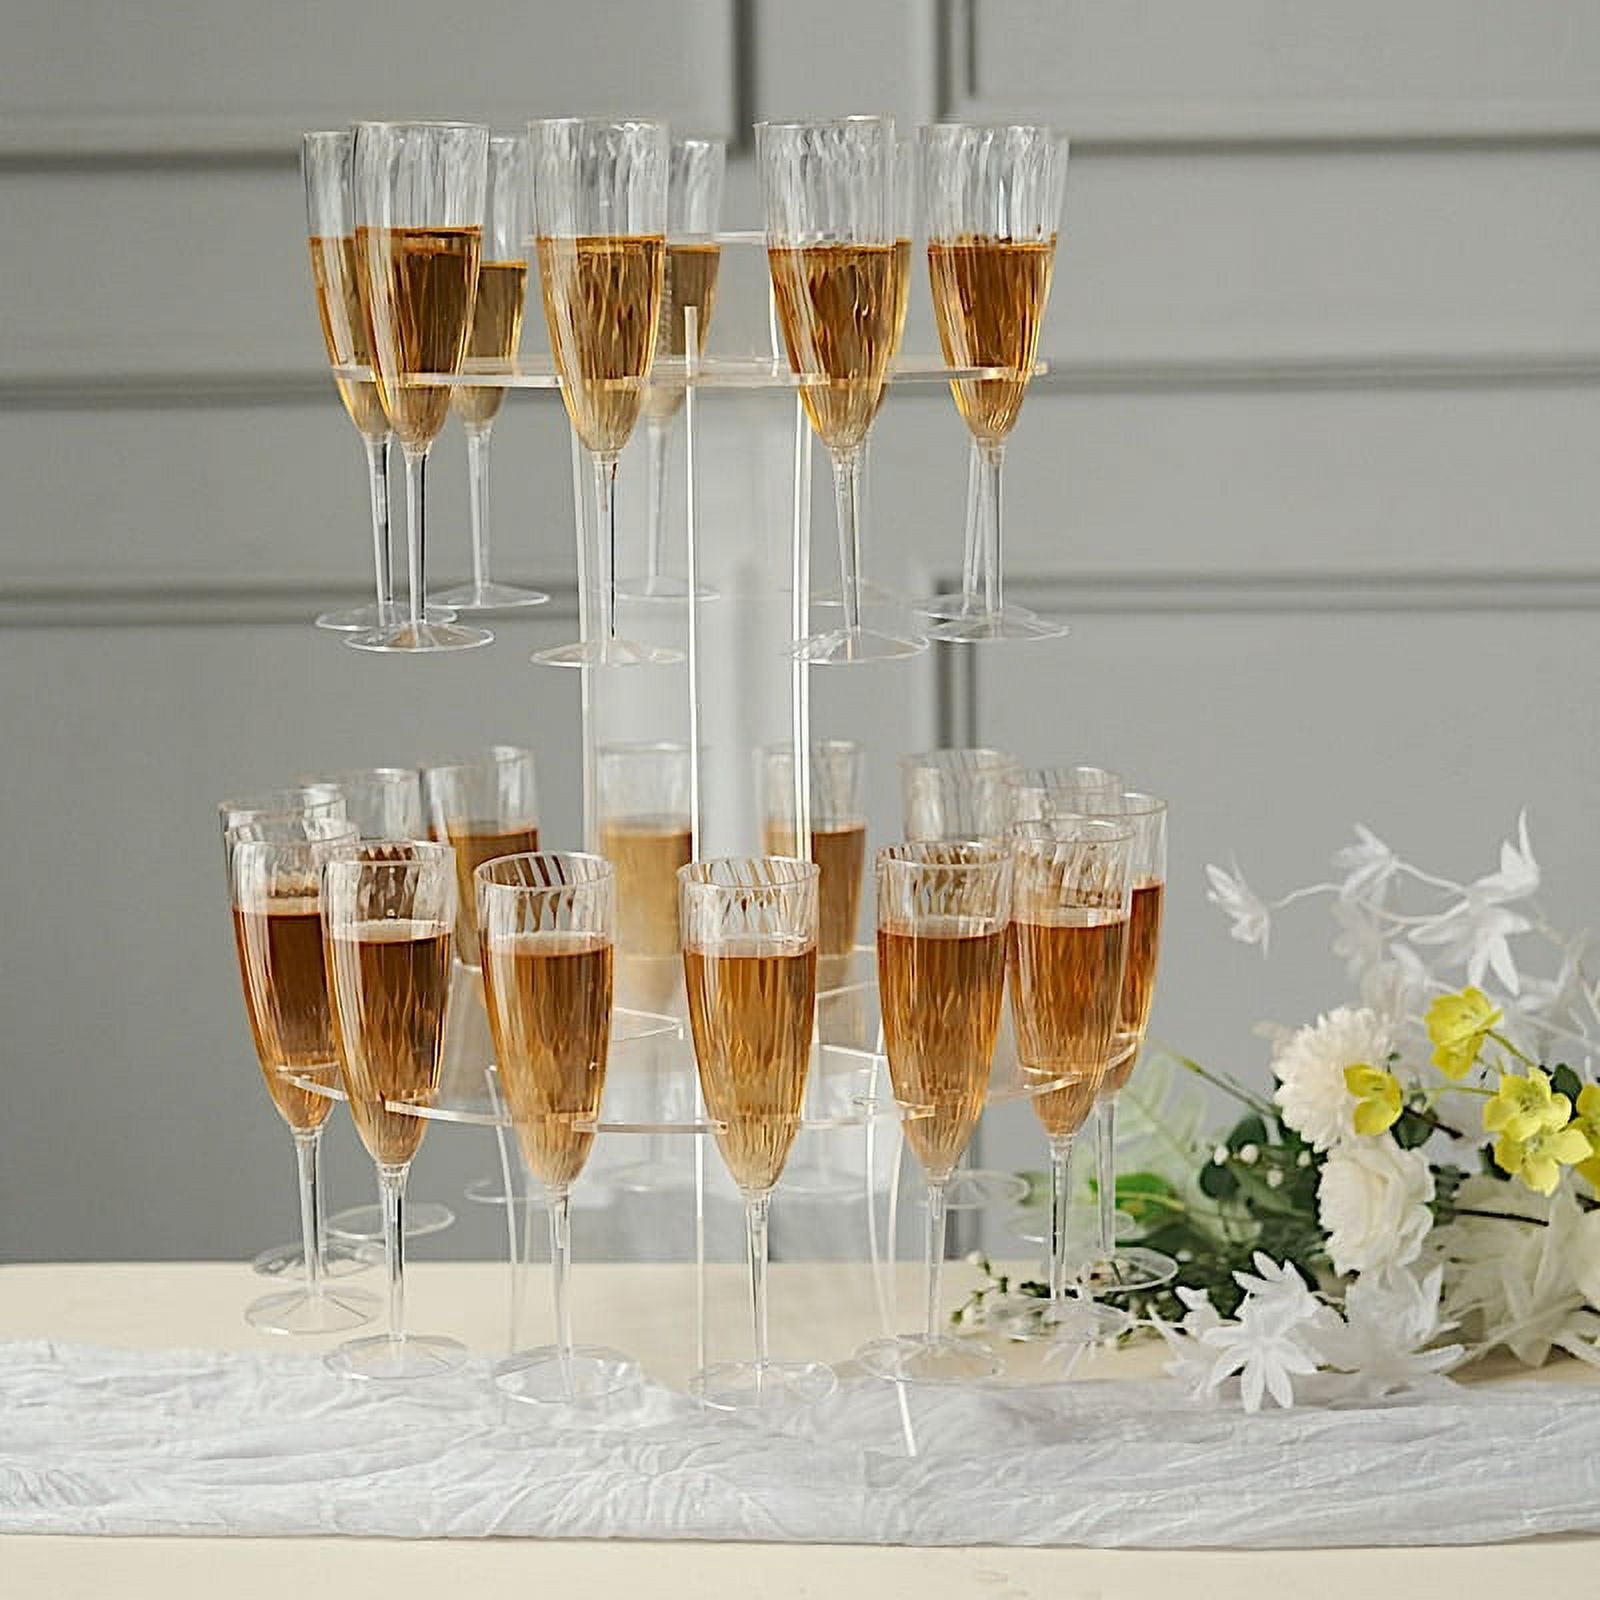 How to hold a champagne glass in an elegant way!